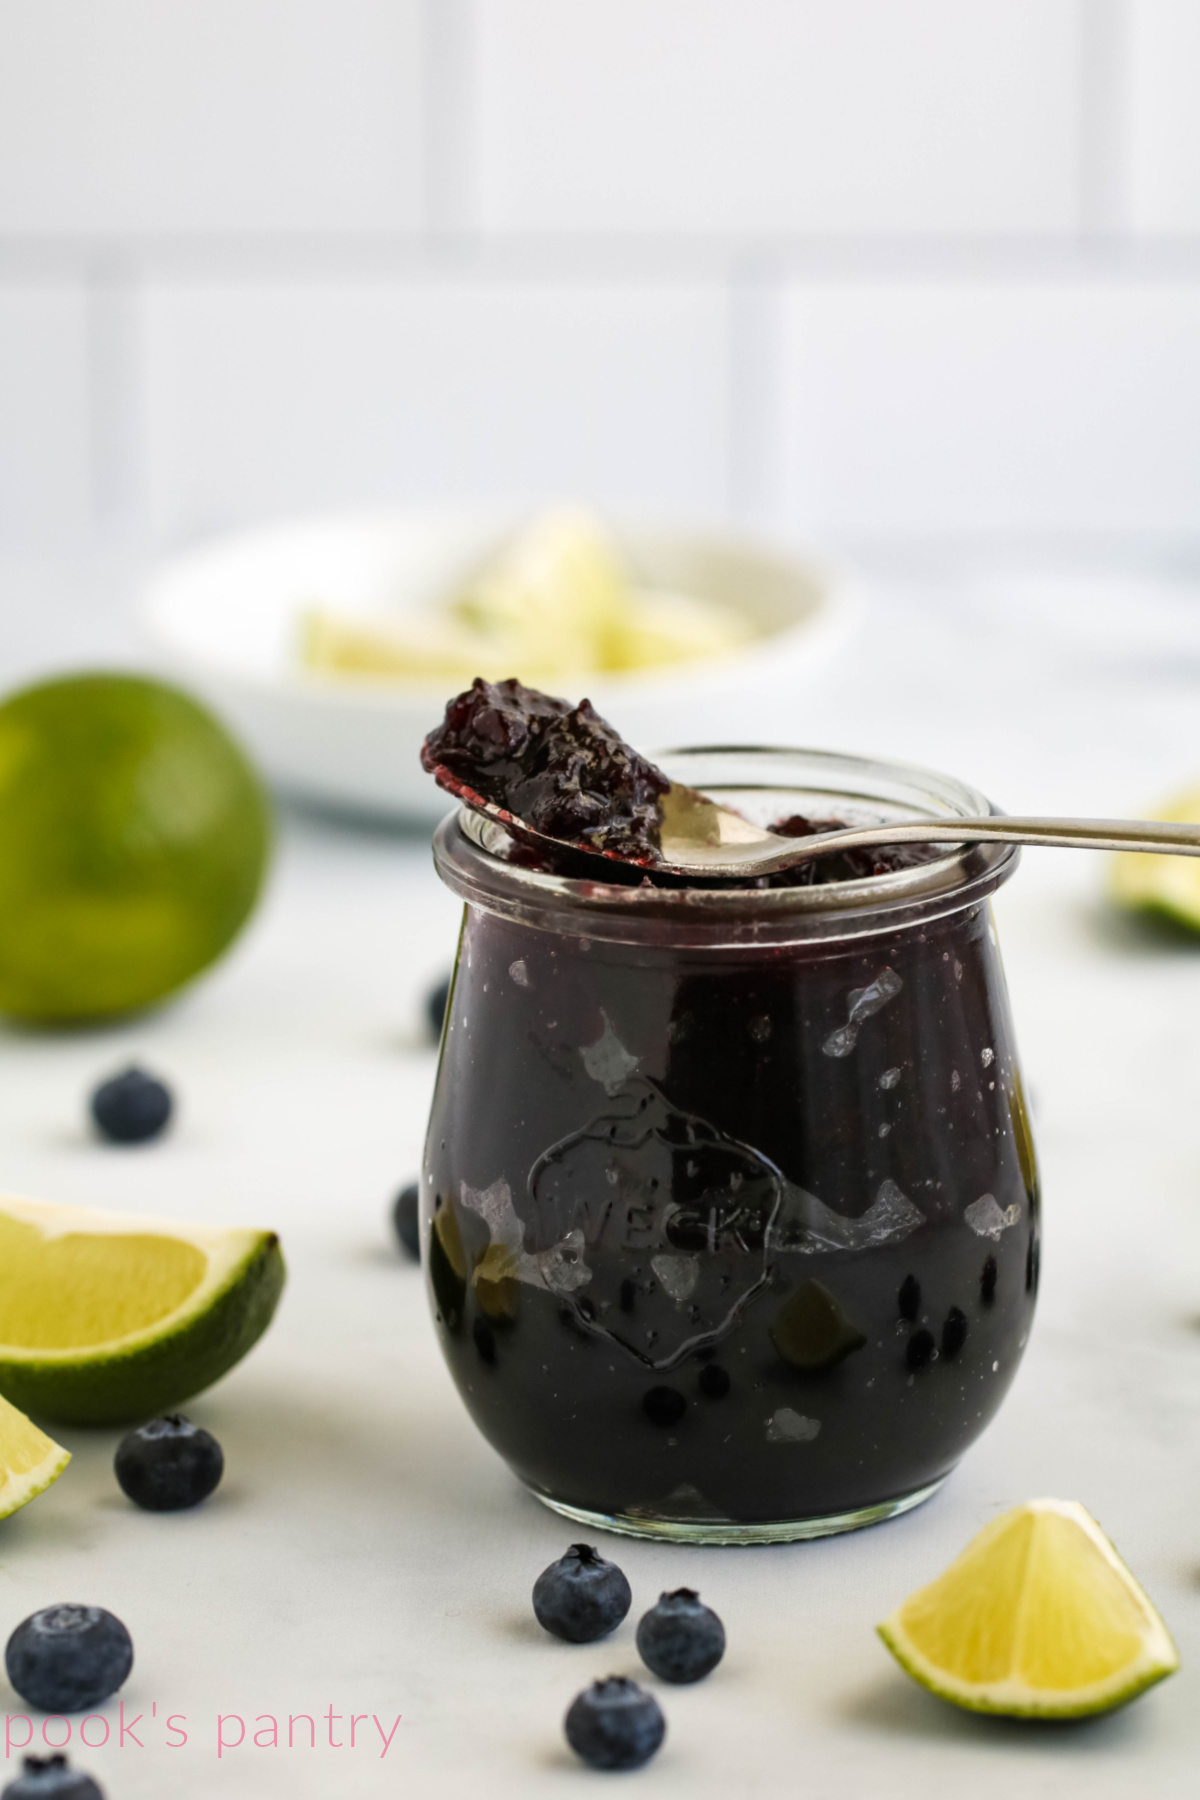 Jam with blueberries and limes in jar.